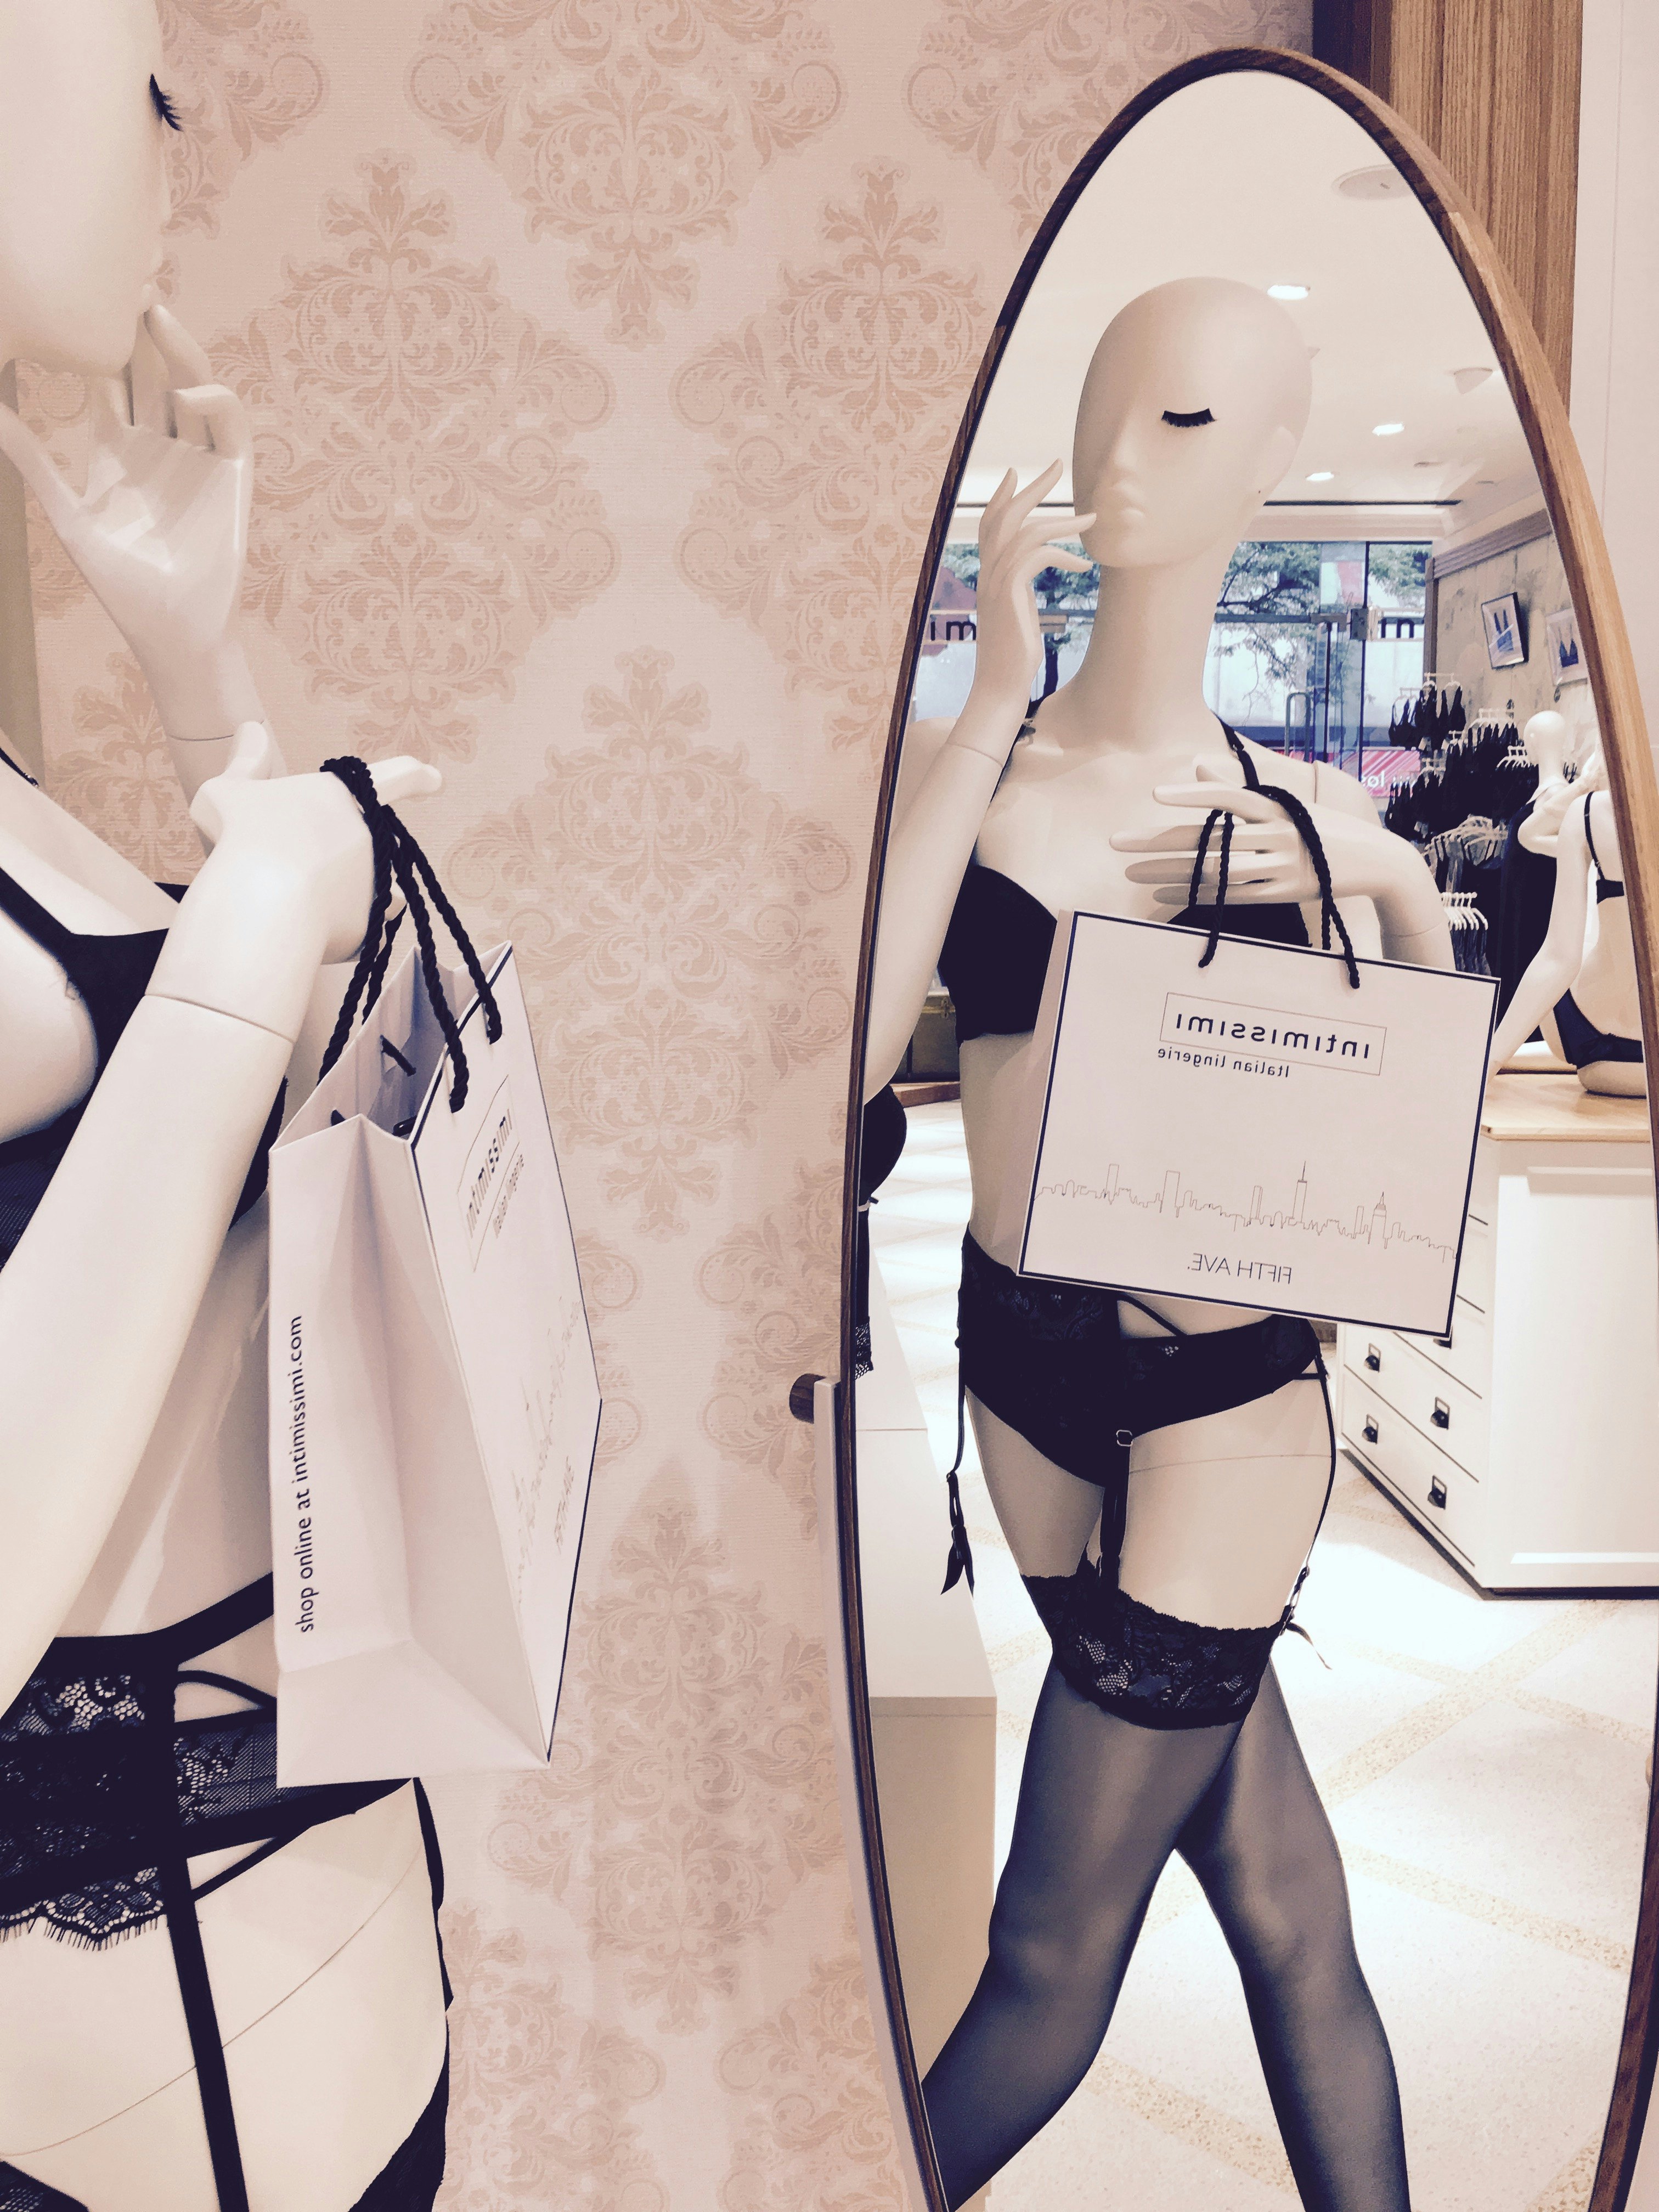 Intimissimi has finally landed in the US. Here's everything to know about  the lingerie brand.